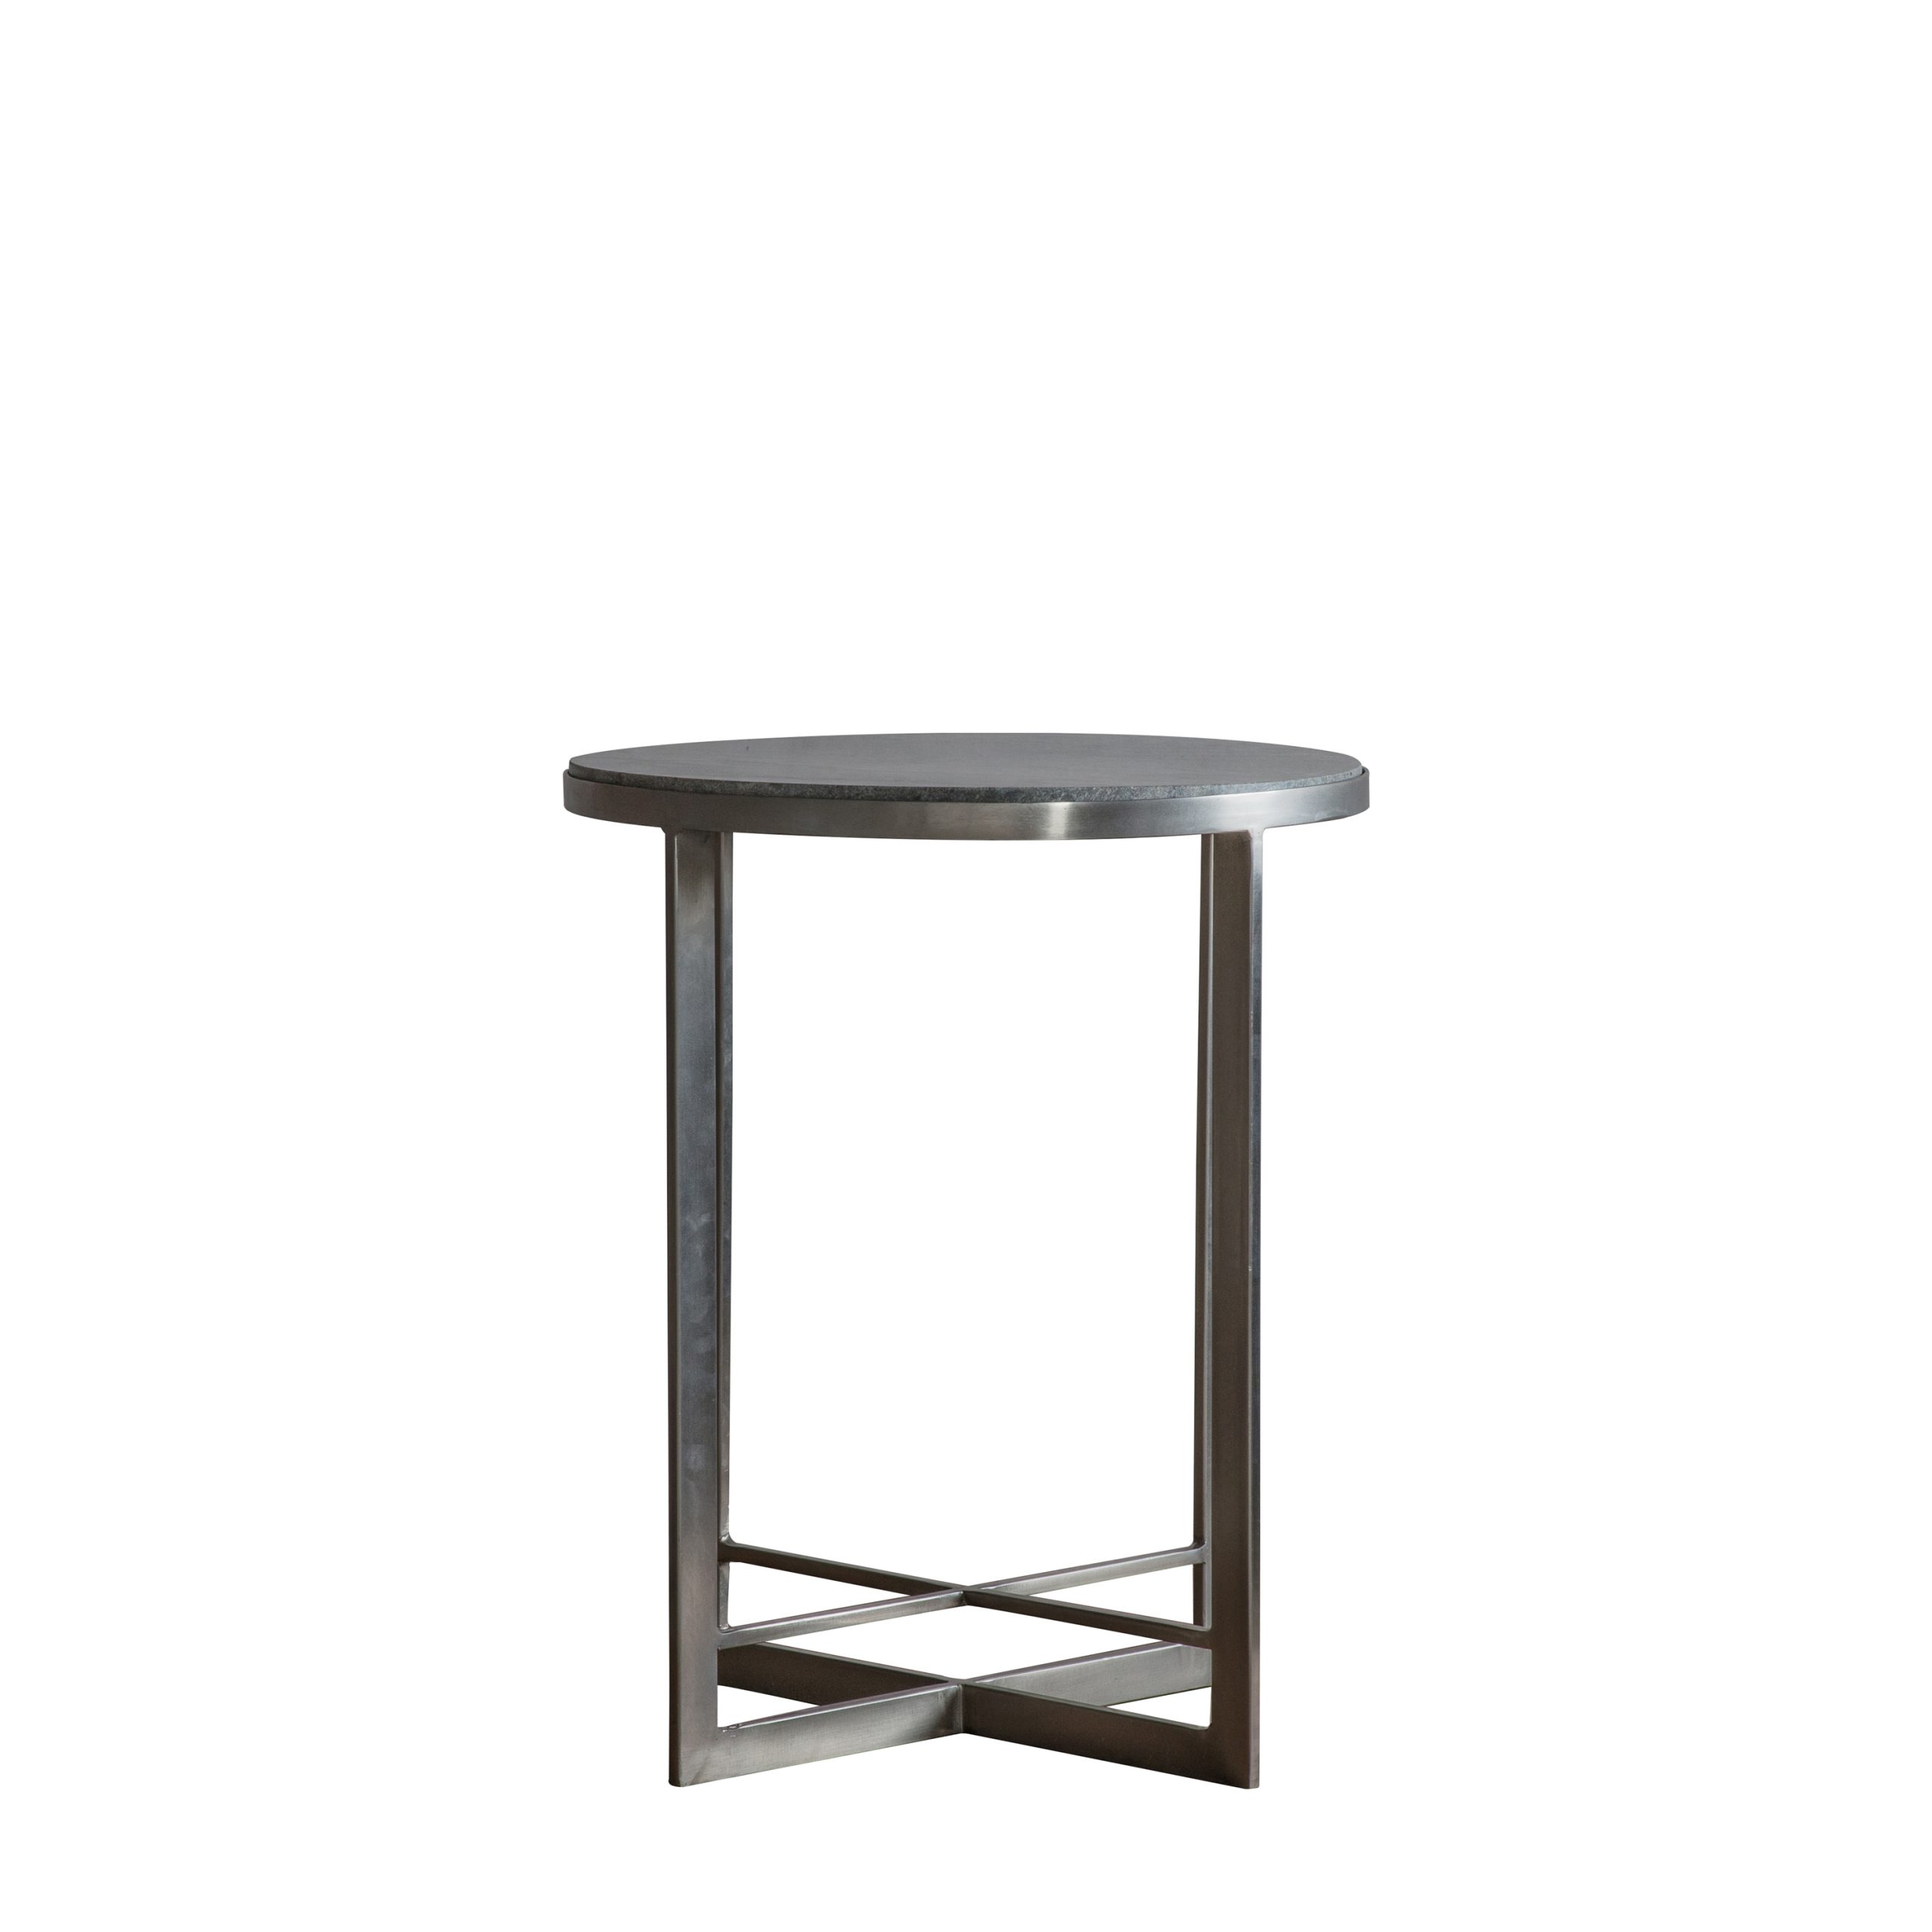 Gallery Direct Necton Side Table Silver